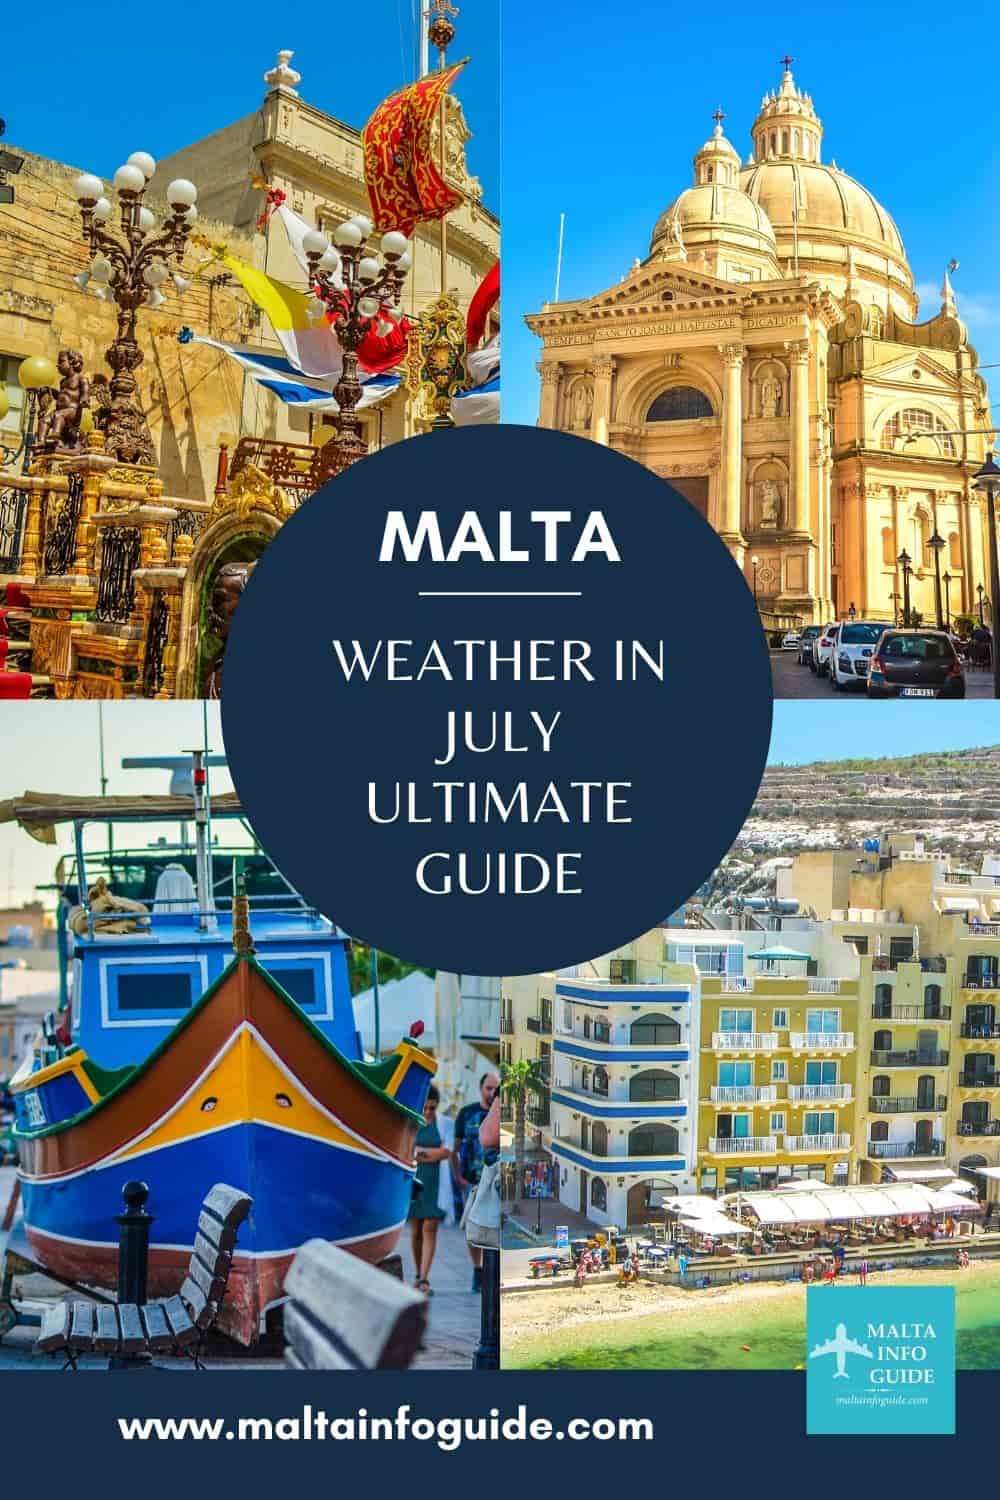 Very hot gloriously weather. Stay as much as possible in the shade, walks by the sea in the evenings and swimming is recommended. See details on the weather in Malta in July.